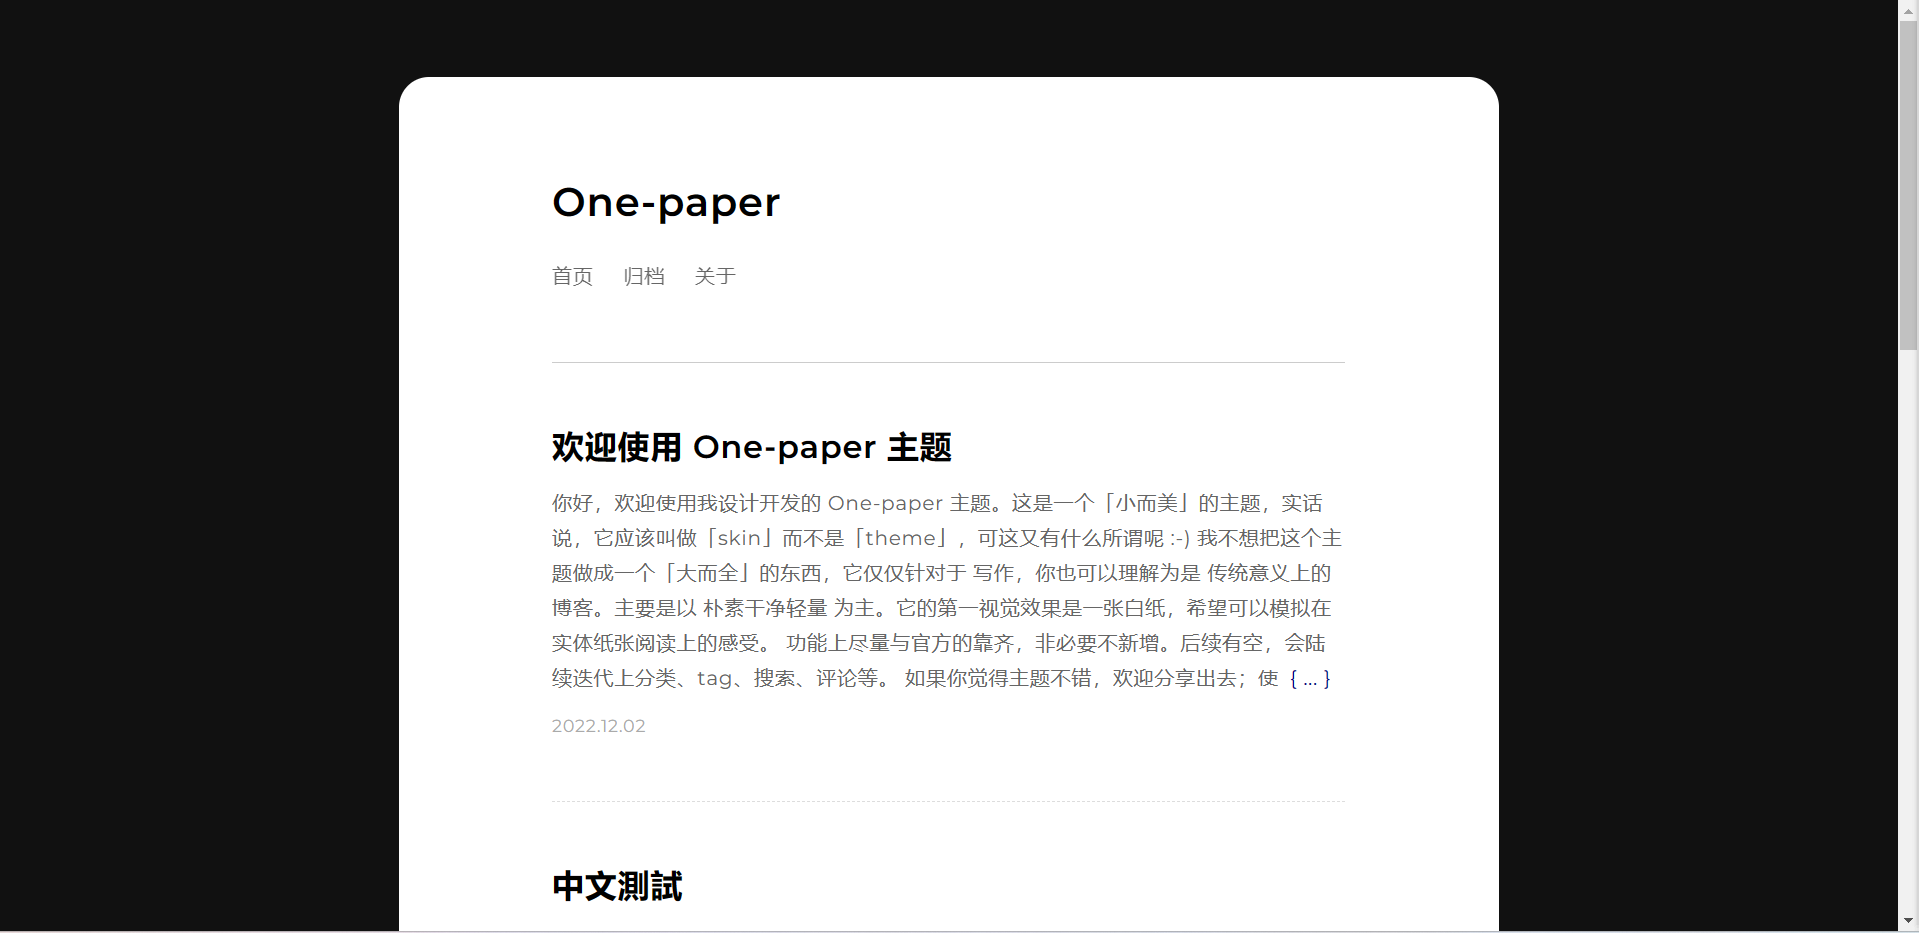 One-paper